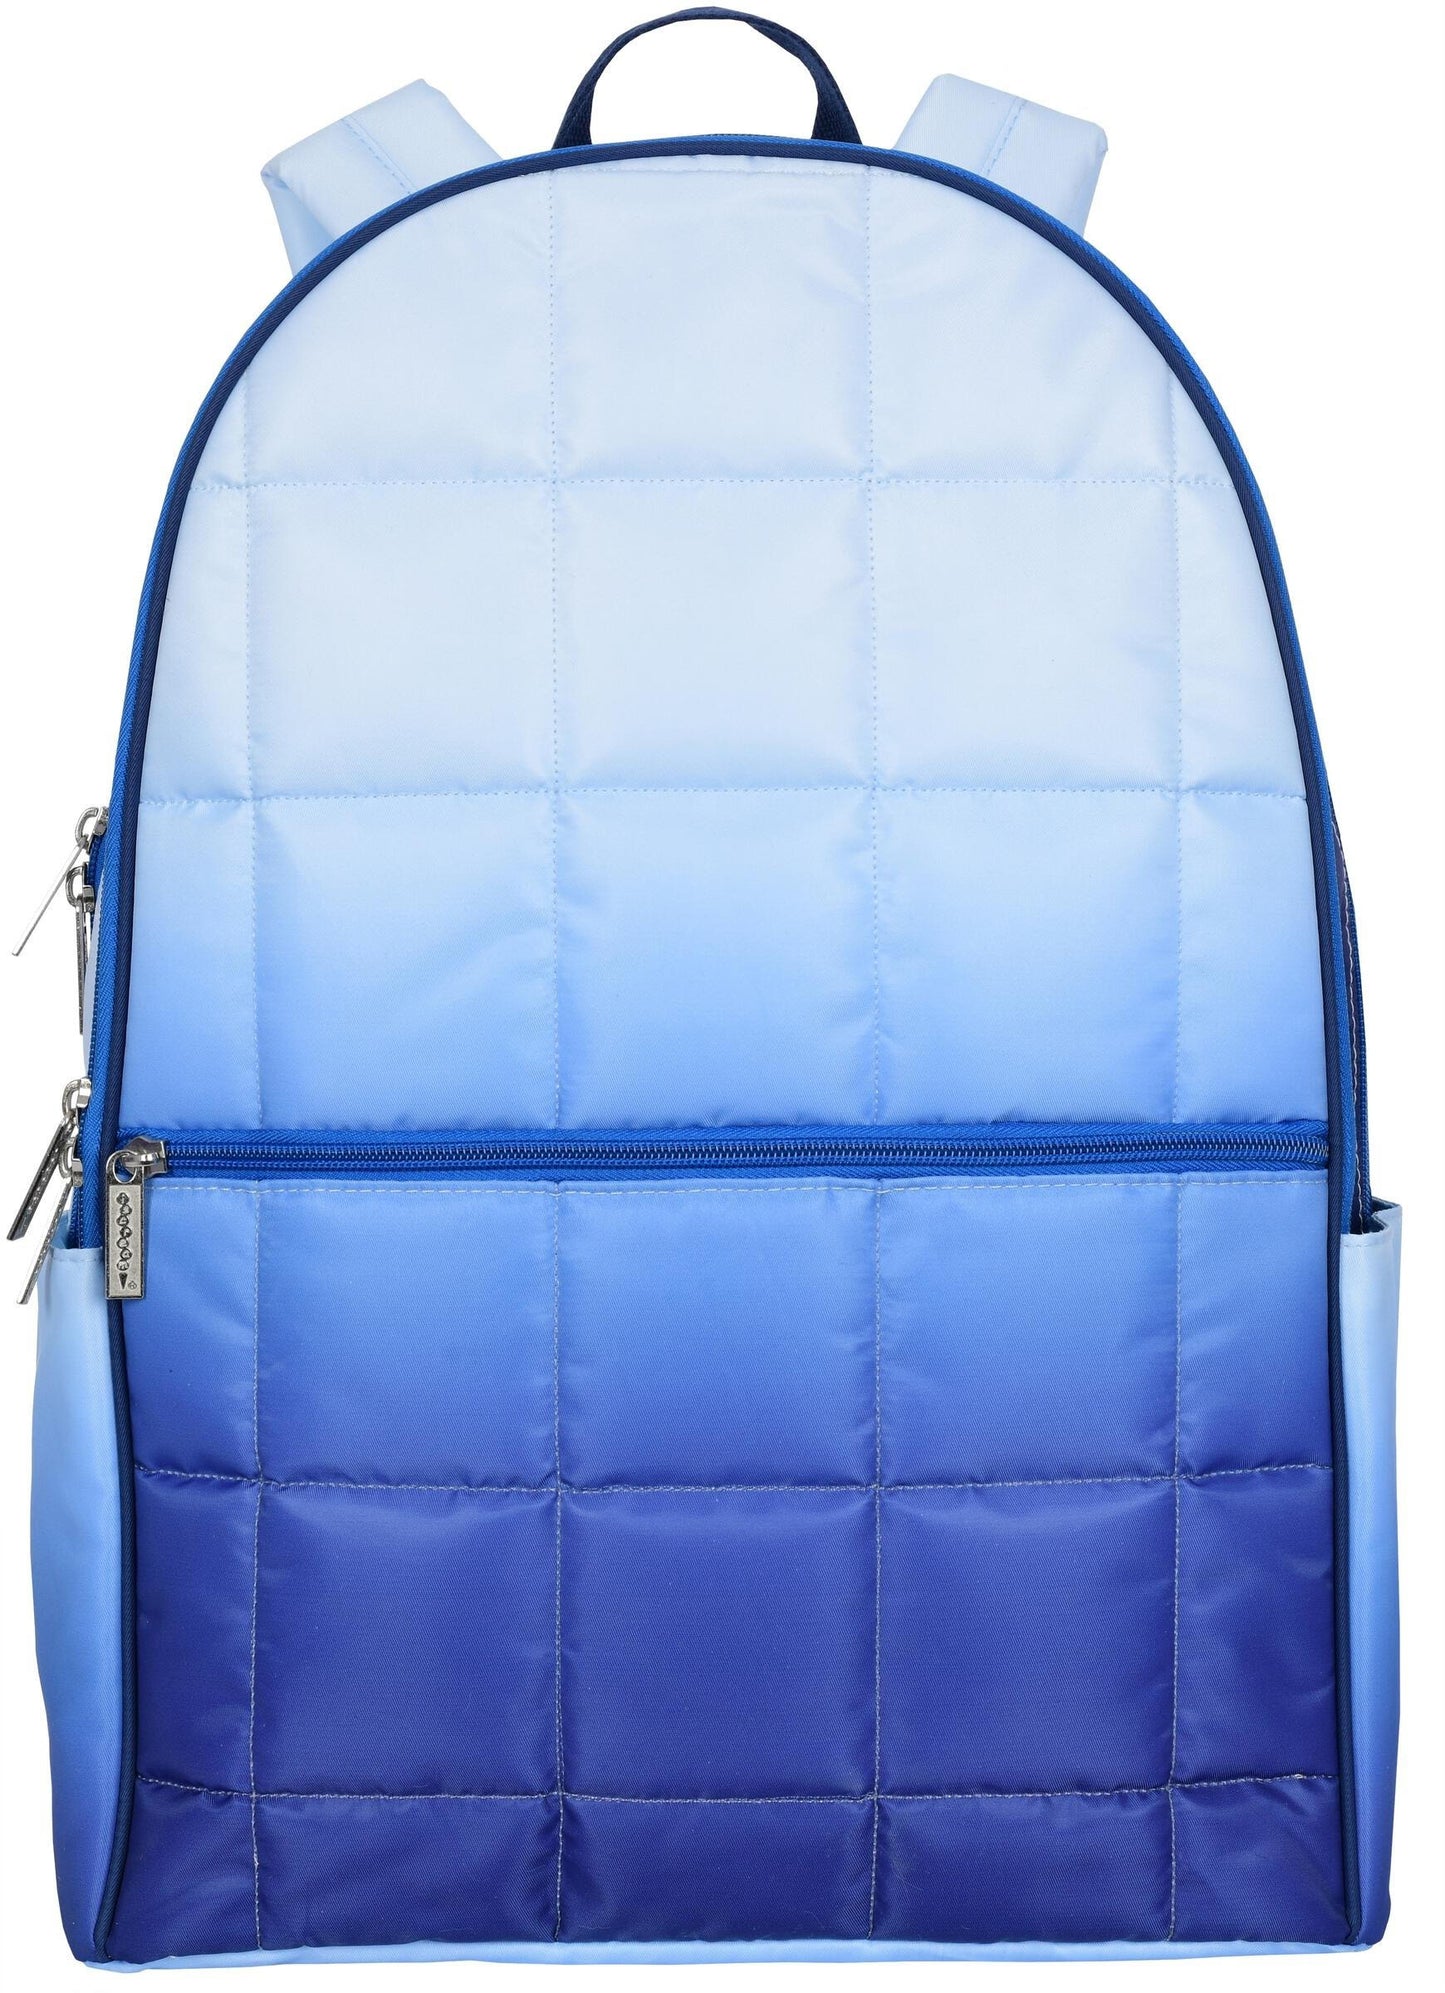 Iscream Blue Ombre Quilted Backpack